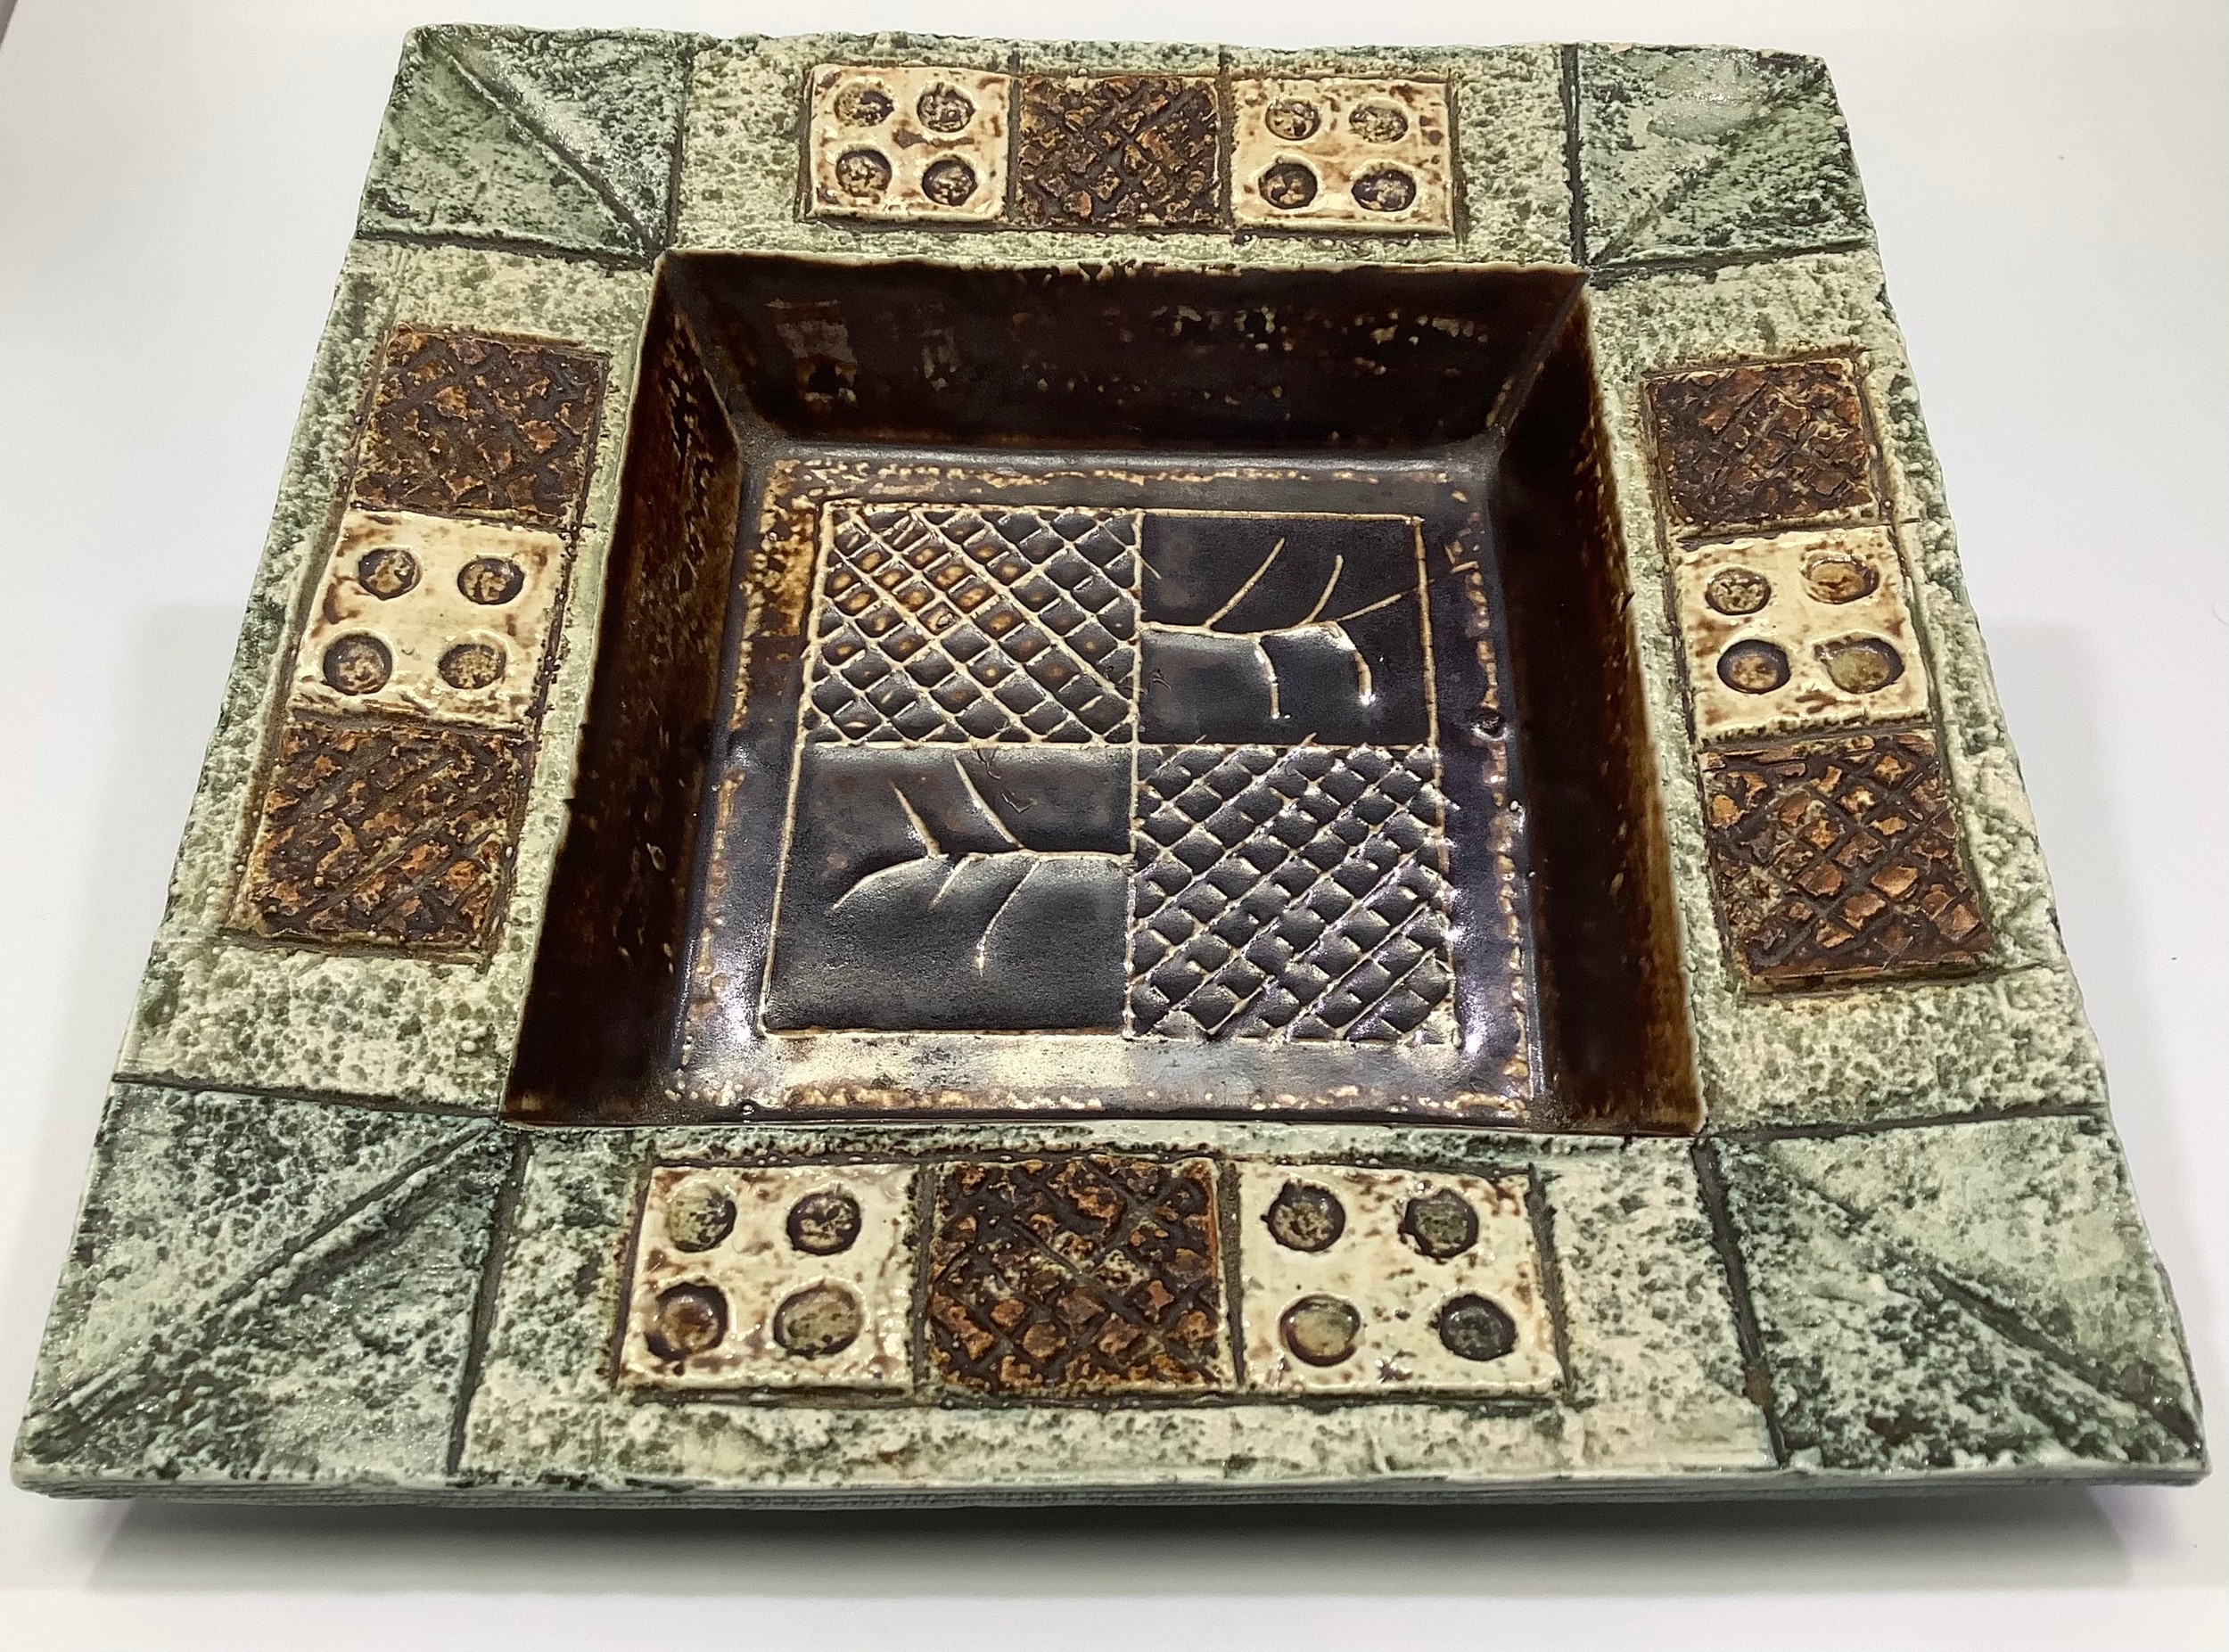 A Troika Pottery dish/ashtray of squared form decorated by Louise Jinks, with incised and painted